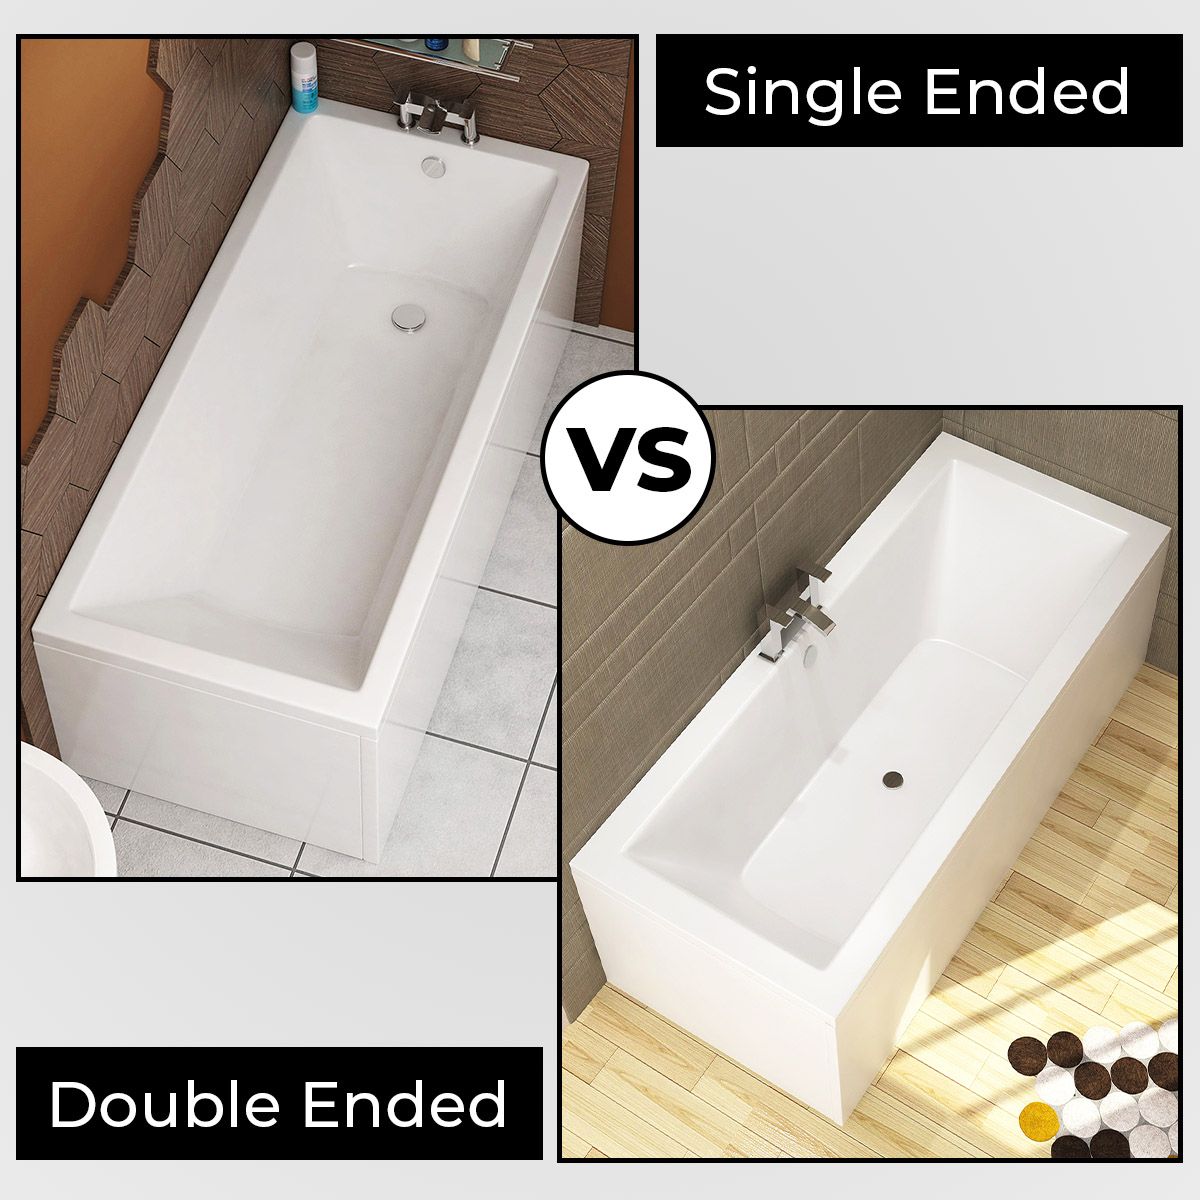 Everything you need to know about Single ended and Double Ended Baths